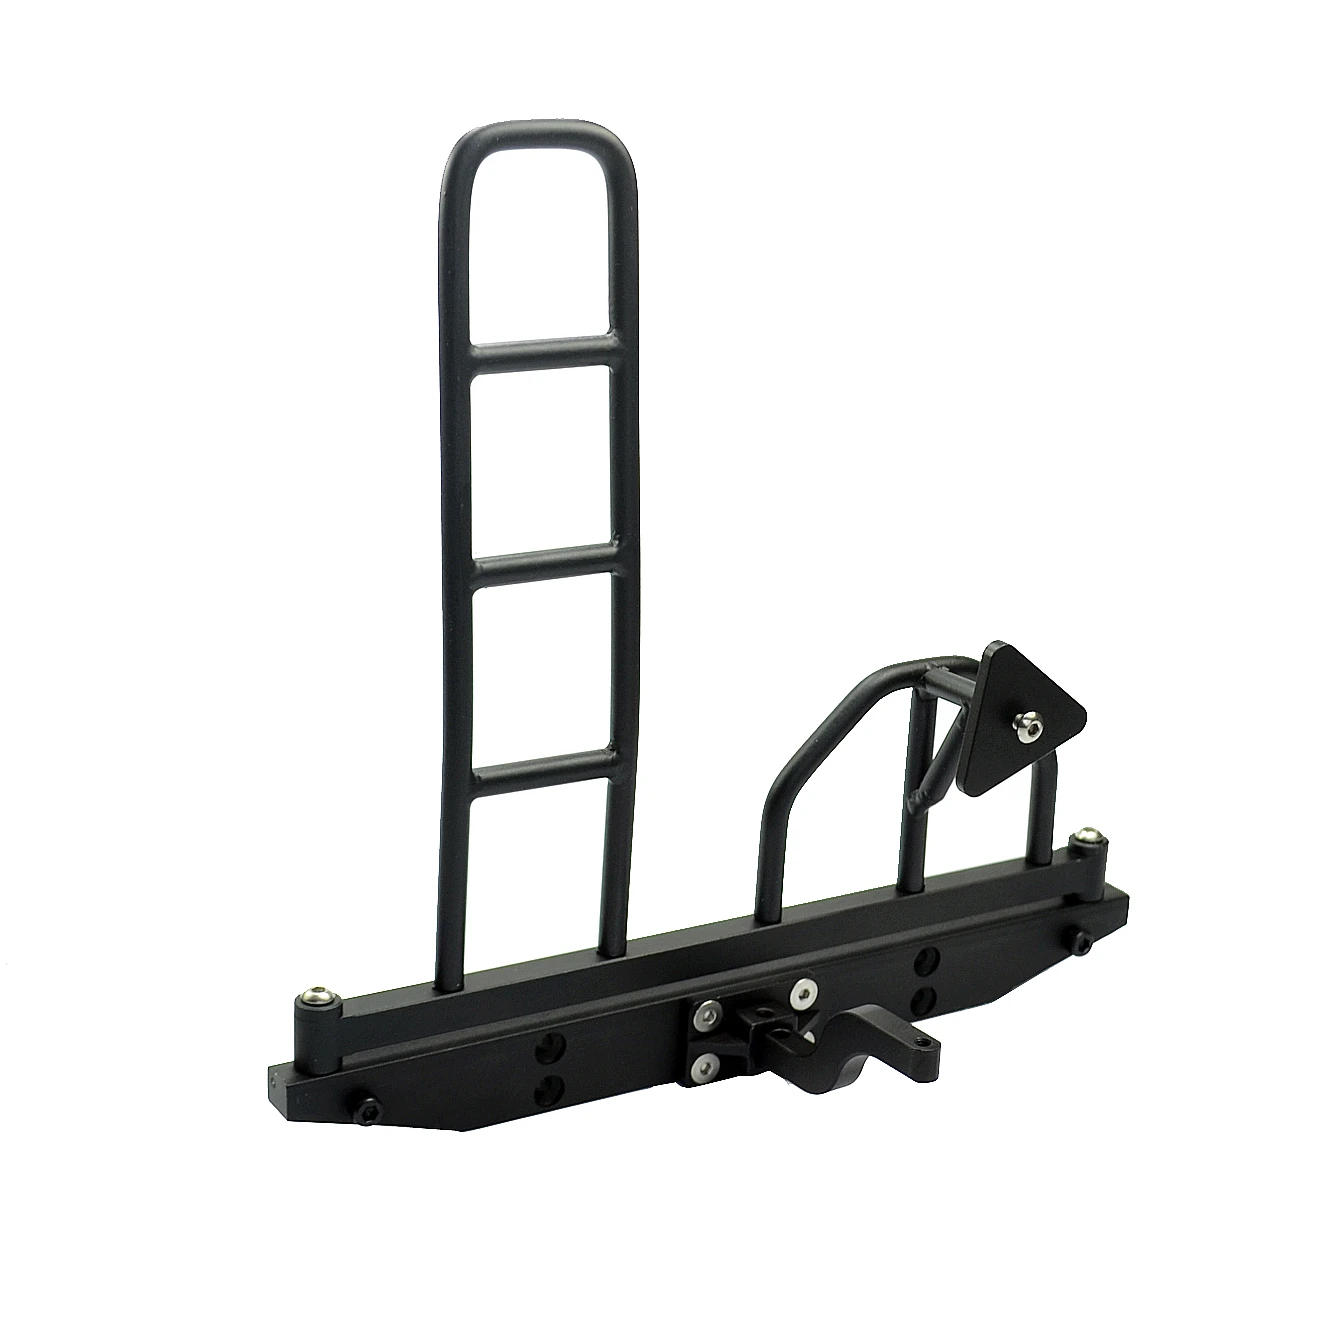 1/10 Spare Tire Rack for 1:10 Axial SCX10 RC4WD D90 D110 RC Car Crawler Body